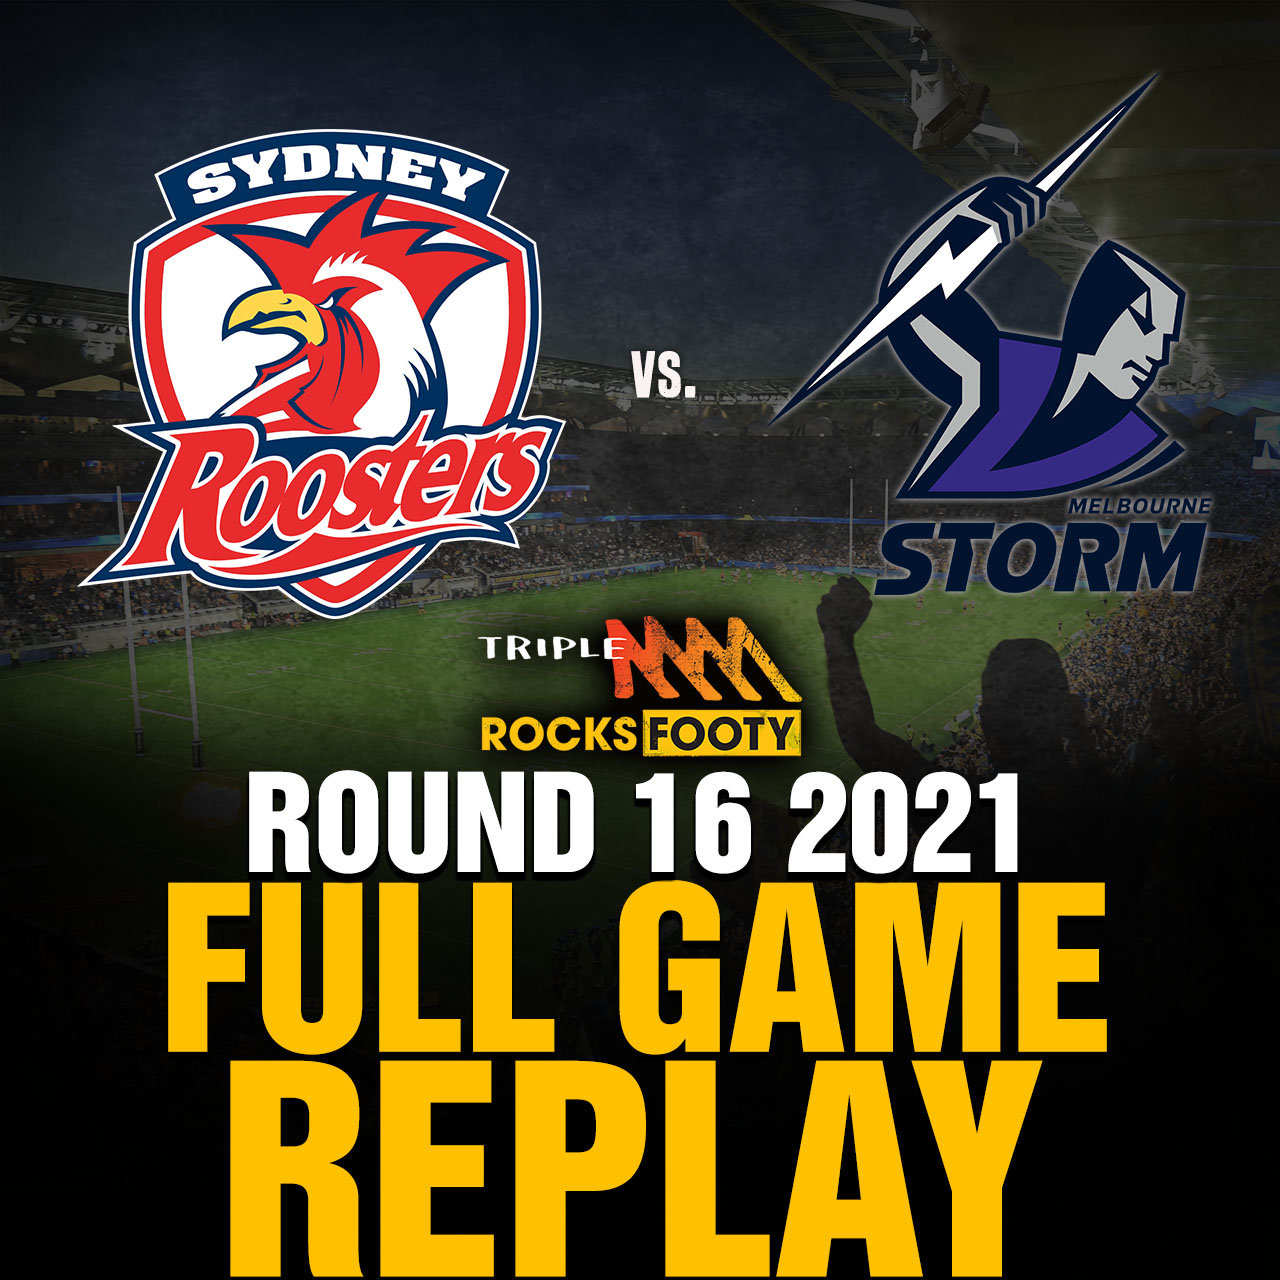 FULL GAME REPLAY | Sydney Roosters vs. Melbourne Storm